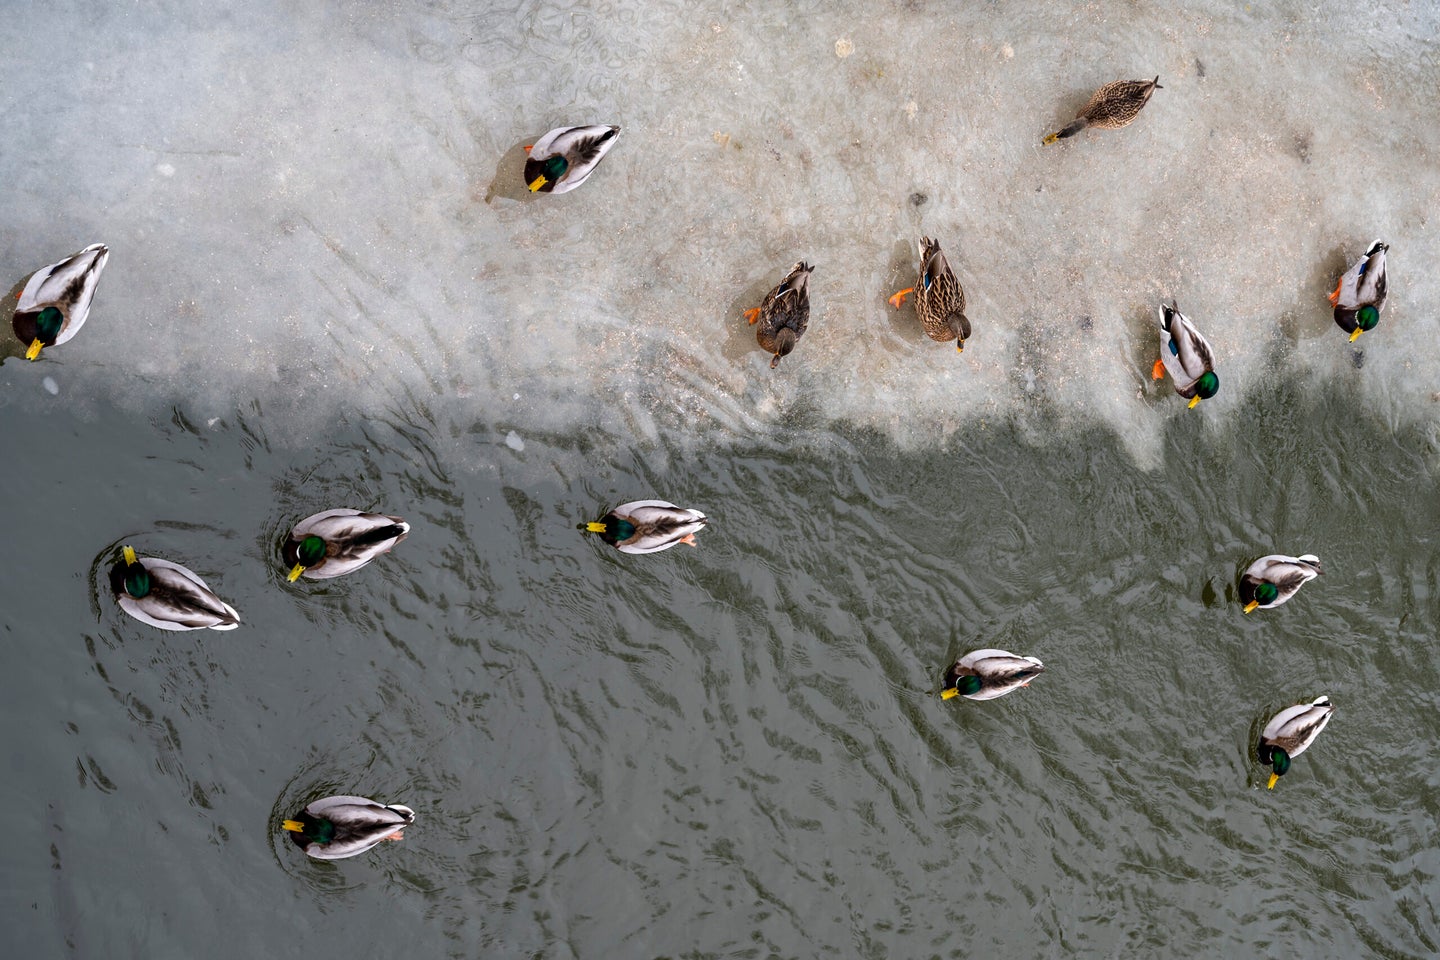 The ducks viewed from above during winter time